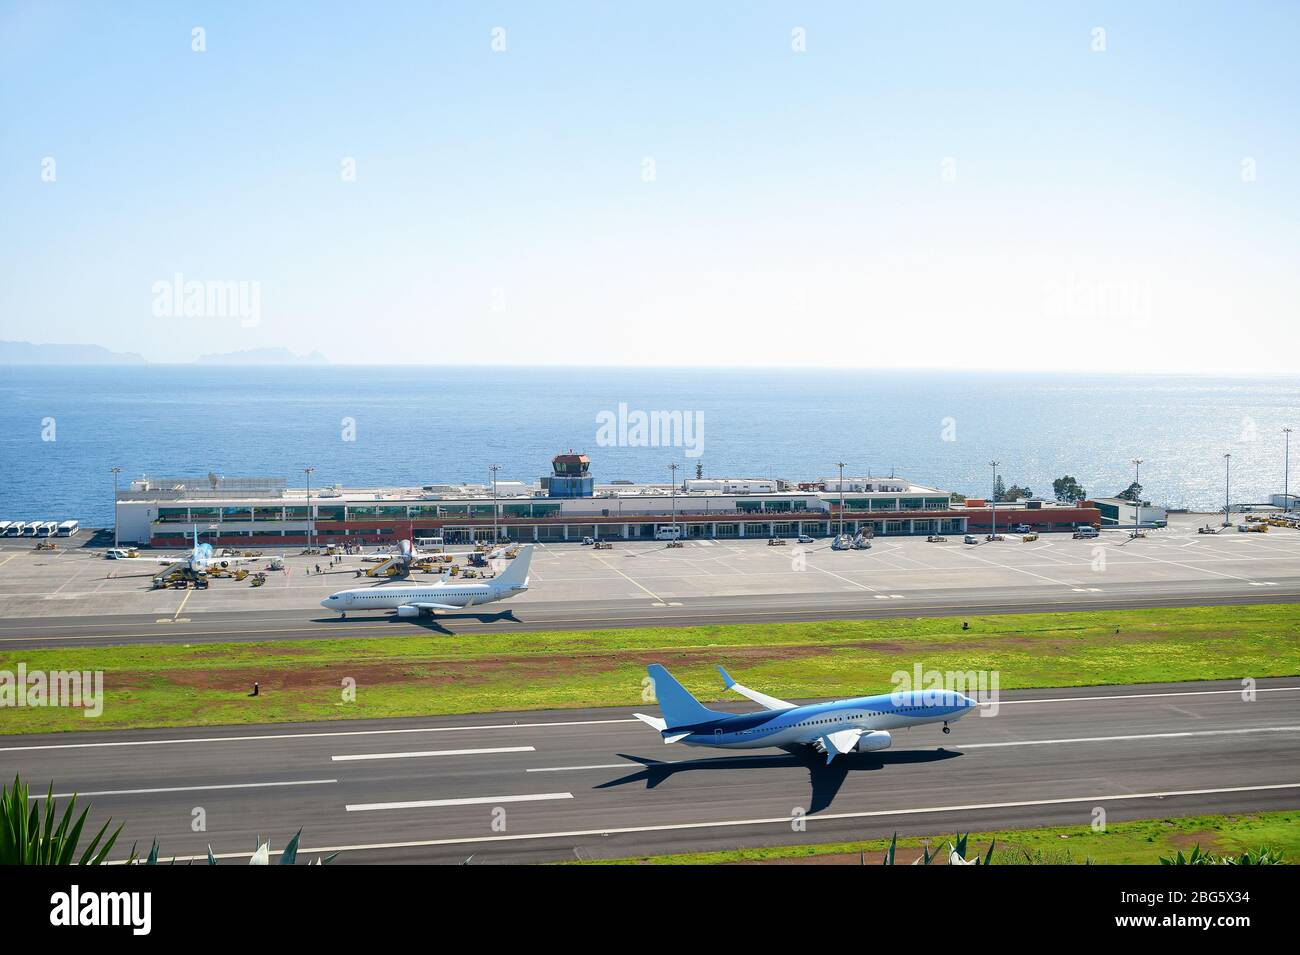 Aerial view of airplane taking off runway at Madeira international airport, airplanes by terminal building and seascape in background, Portugal Stock Photo